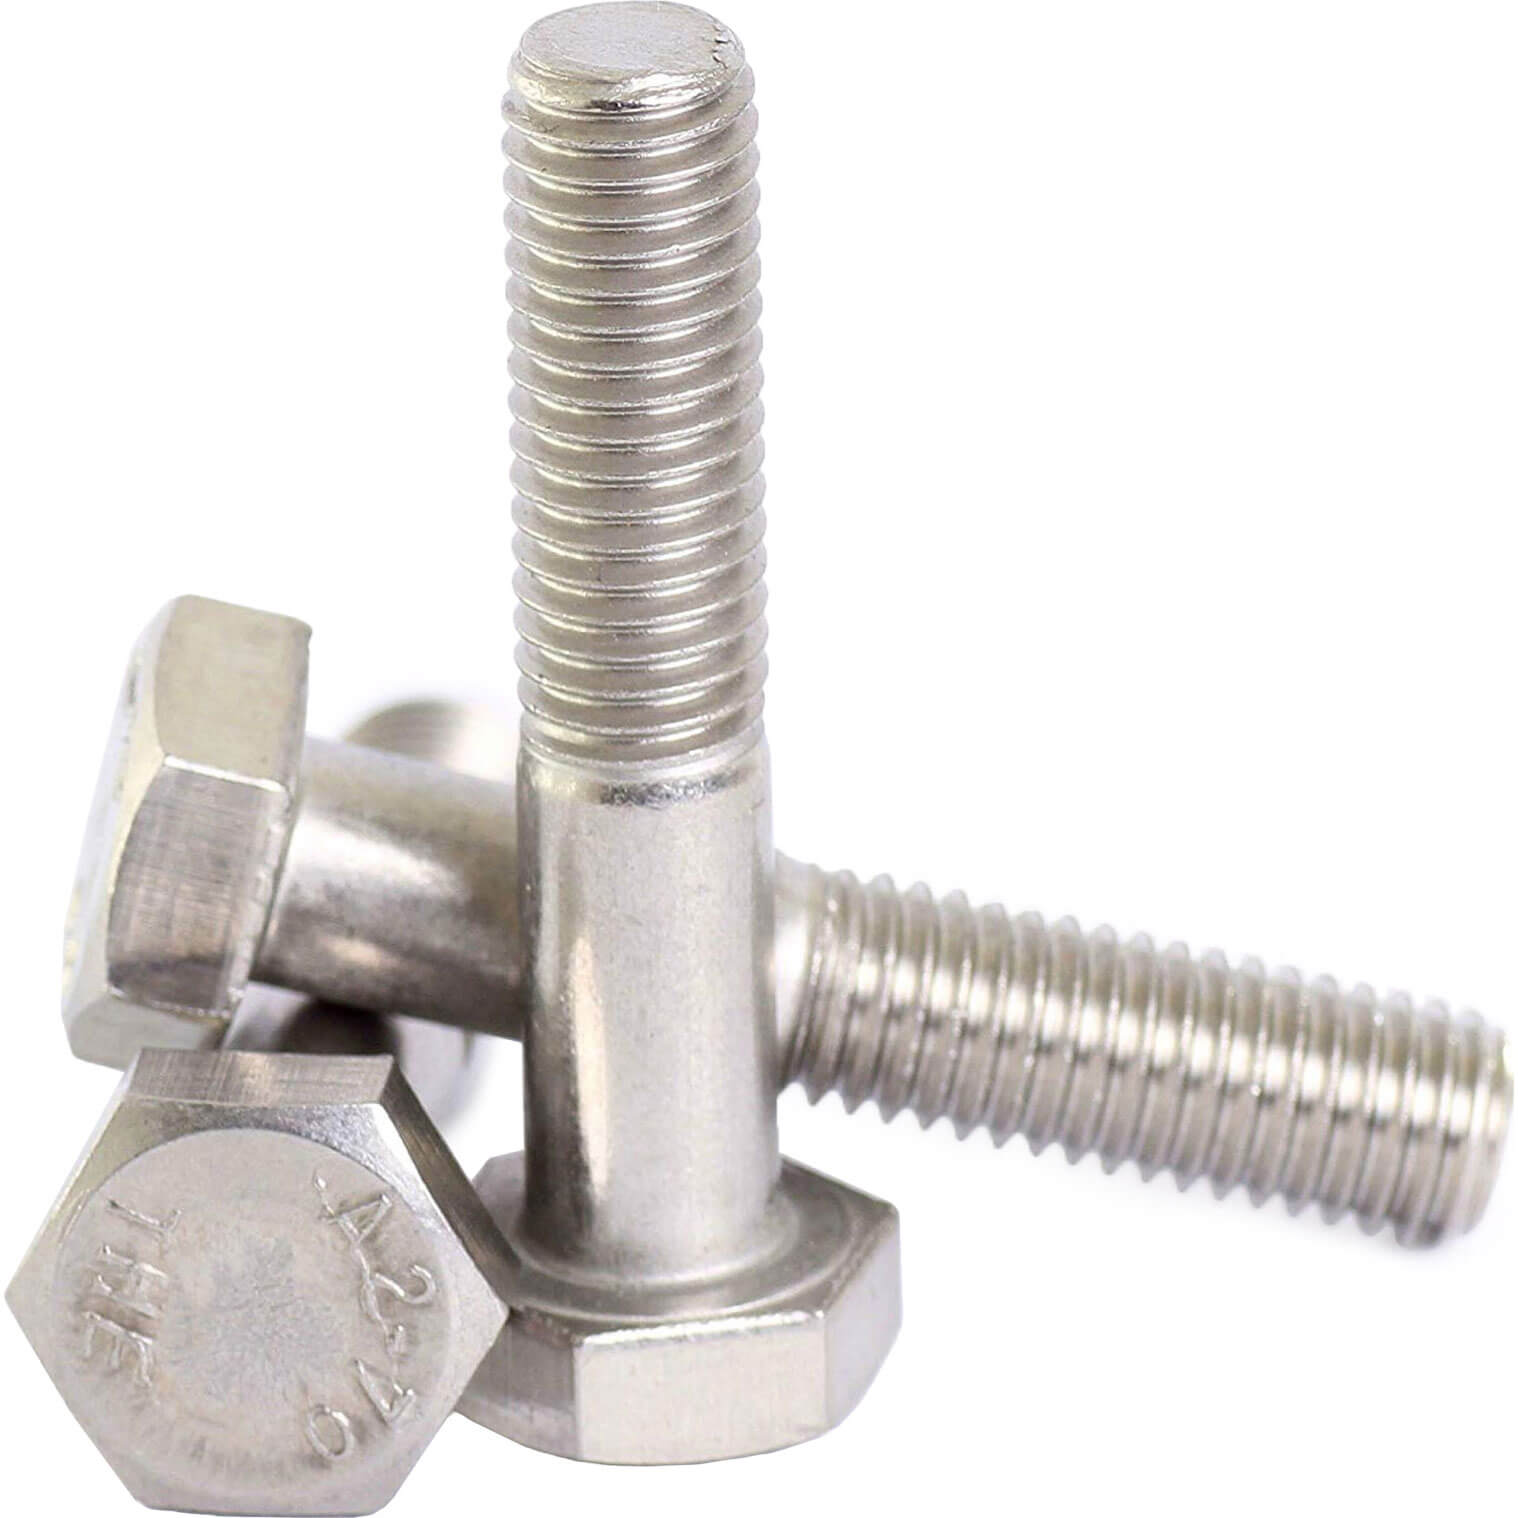 Photos - Nail / Screw / Fastener Sirius Bolts A2 304 Stainless Steel M8 40mm Pack of 1 